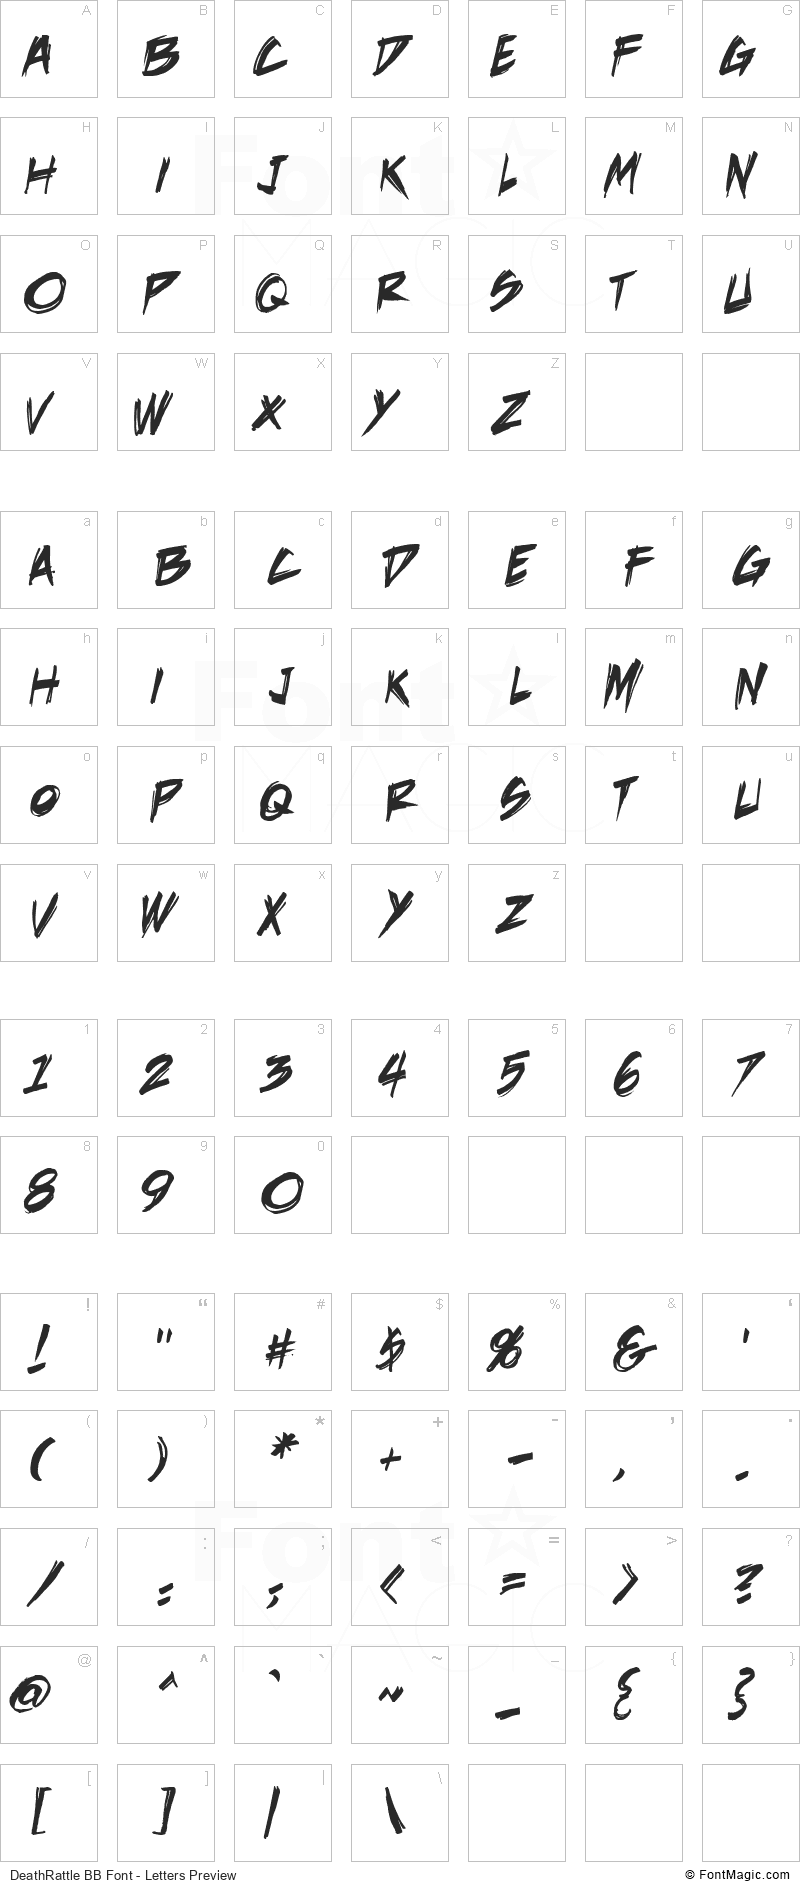 DeathRattle BB Font - All Latters Preview Chart